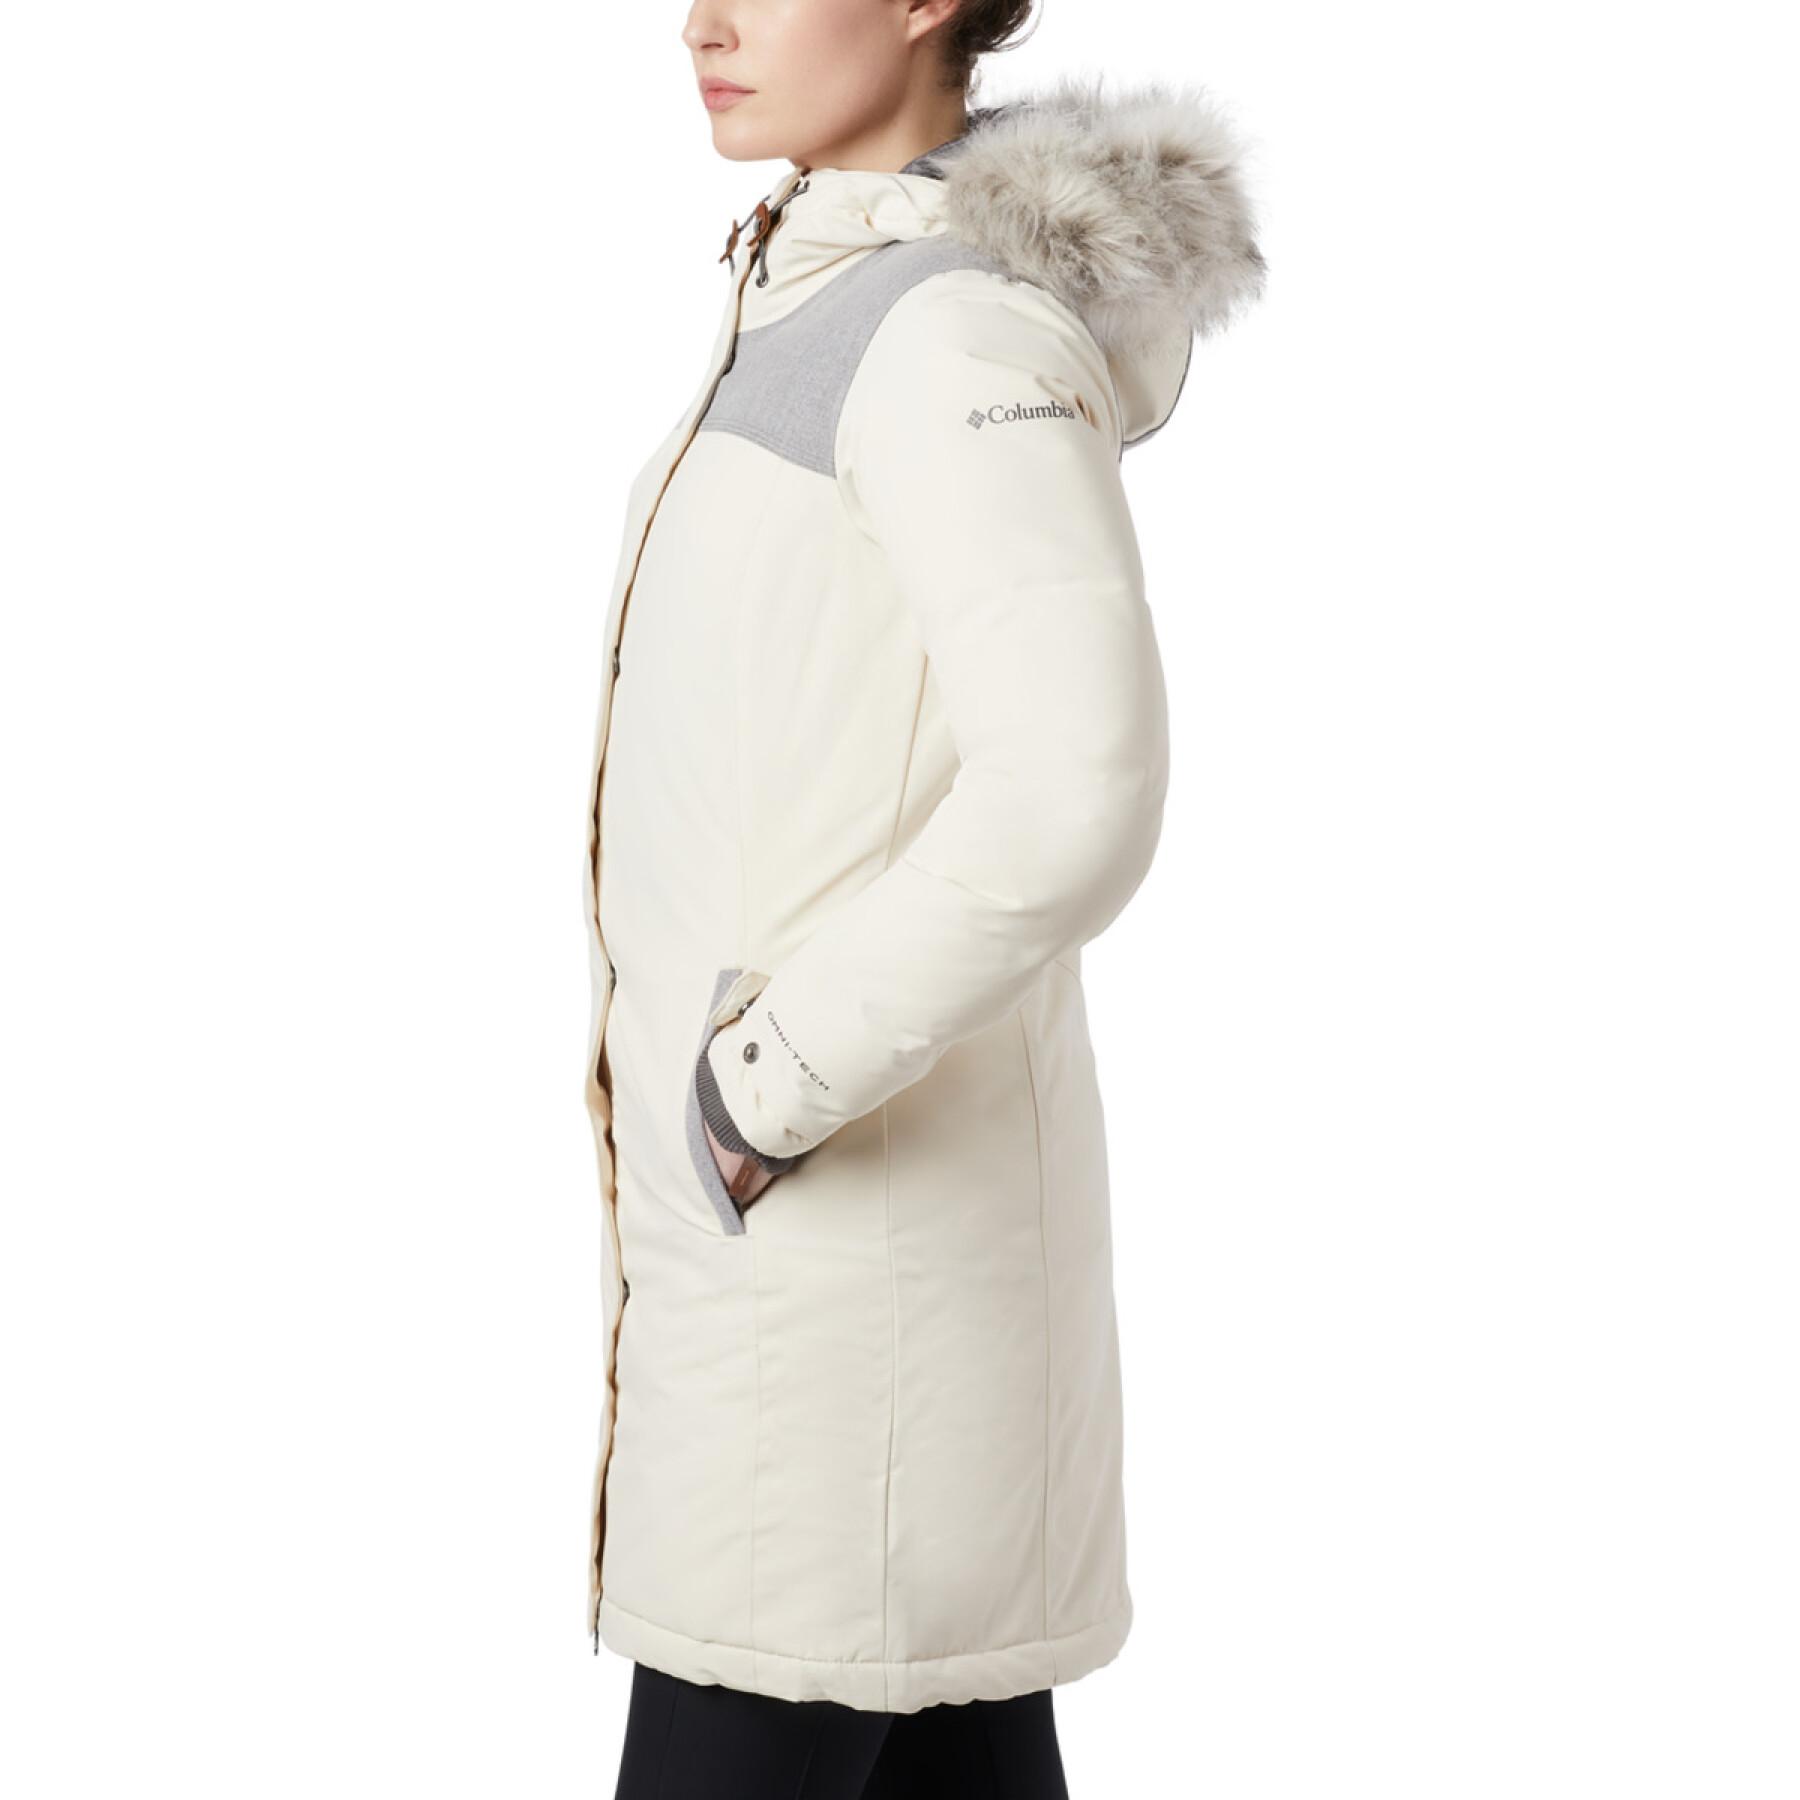 Chaqueta impermeable para mujer Columbia Lindores